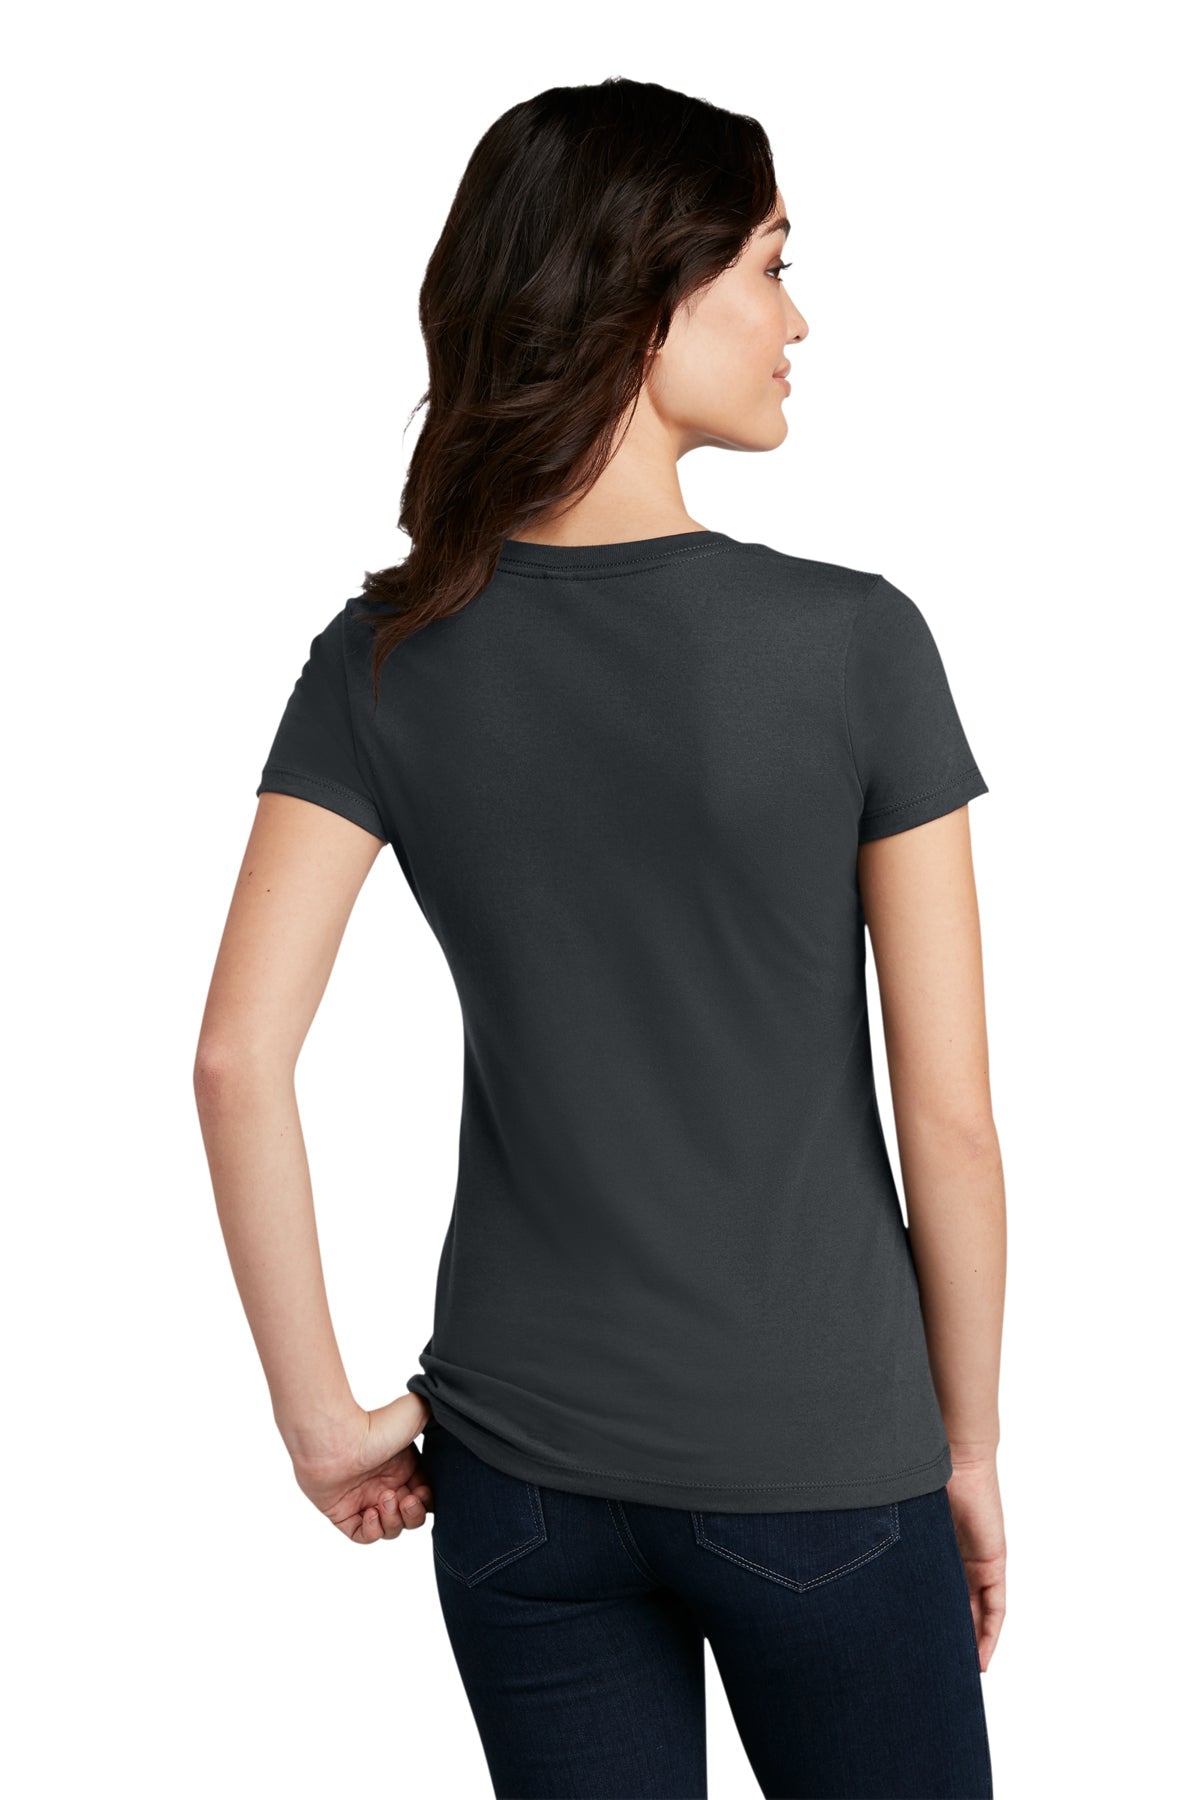 District Made Ladies Perfect Blend Crew Tee's, Charcoal